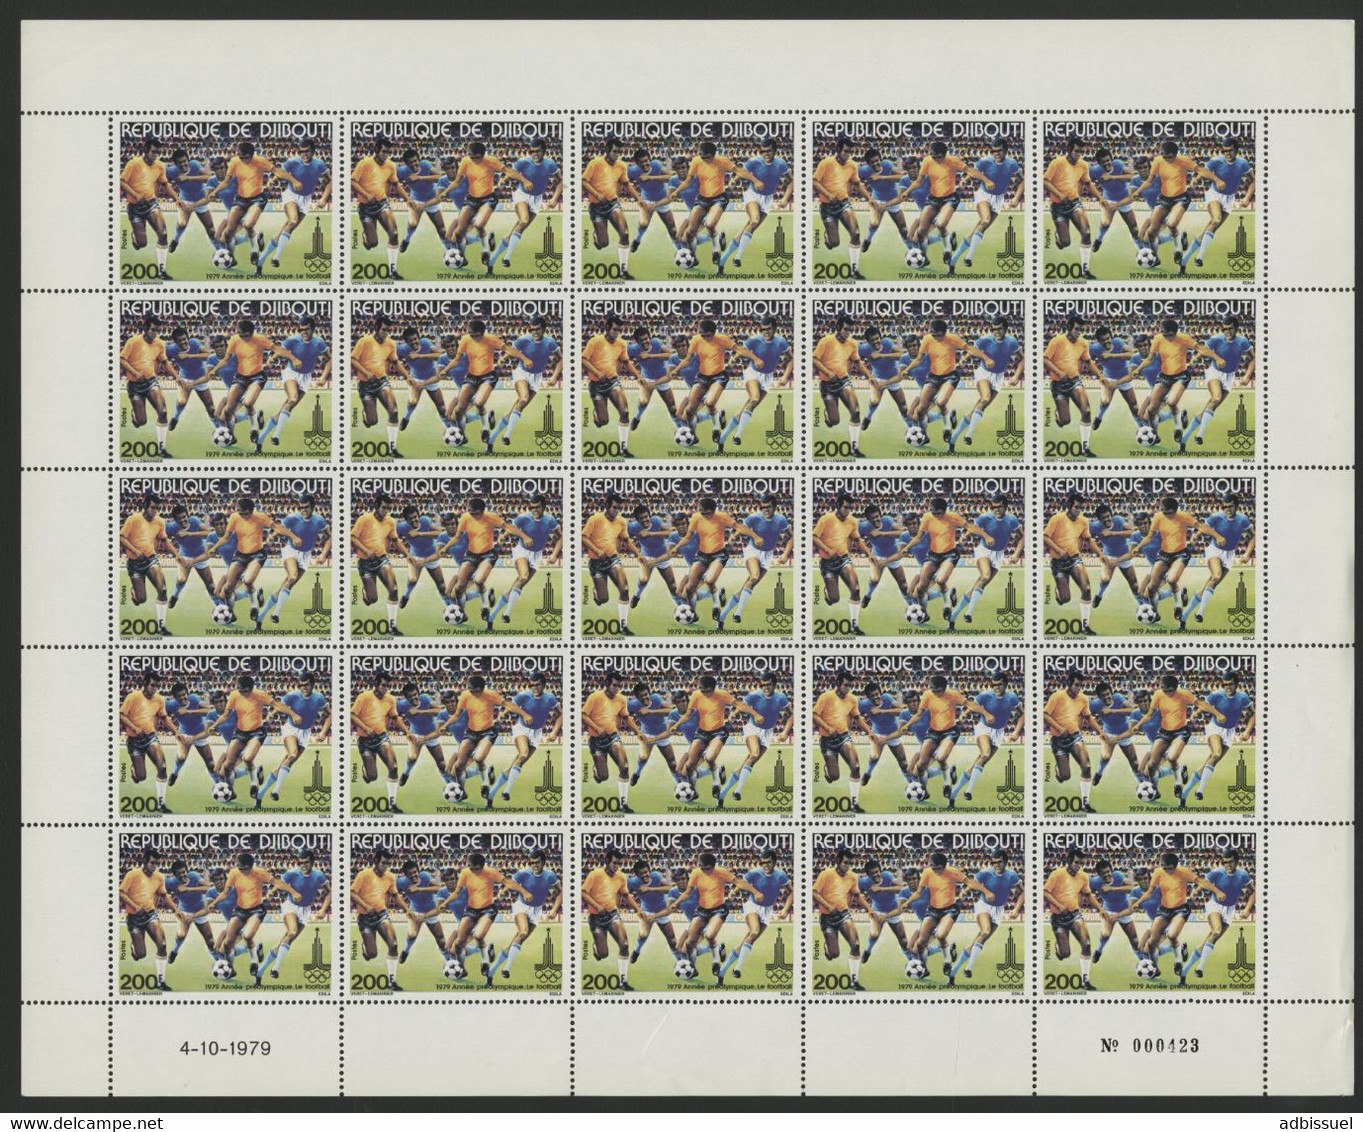 DJIBOUTI N° 511 COTE 106,25 € FEUILLE De 25 Ex. MNH ** ANNEE PREOLYMPIQUE OLYMPIC FOOTBALL SOCCER - Verano 1980: Moscu